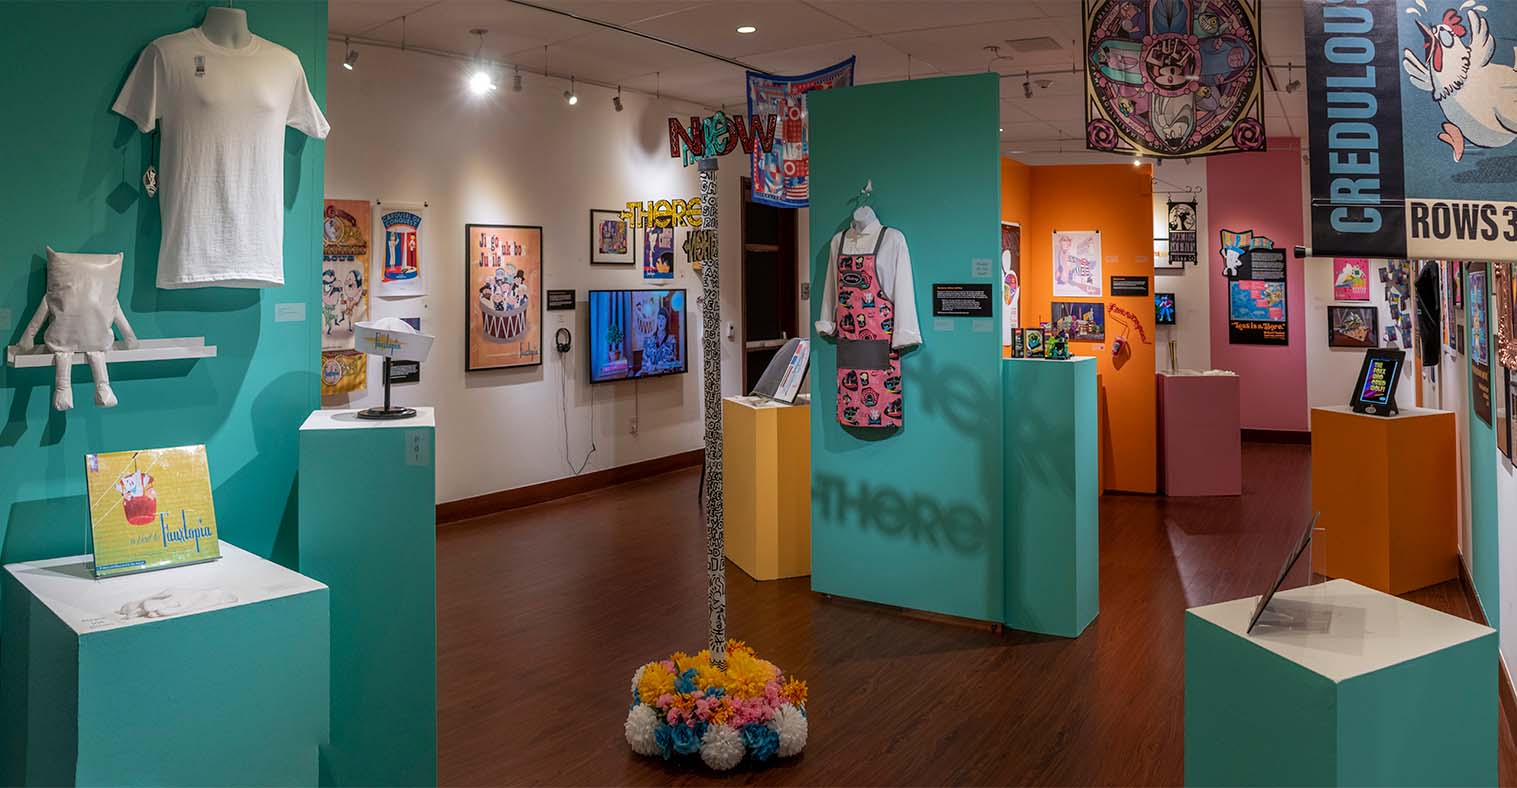 Installation View, Center-Right Gallery, Treasures of Fauxtopia Artifacts, Memorabilia and Souvenirs from The Most Believable Place on Earth Exhibition, Mar. 17 to Sep. 11, 2022.